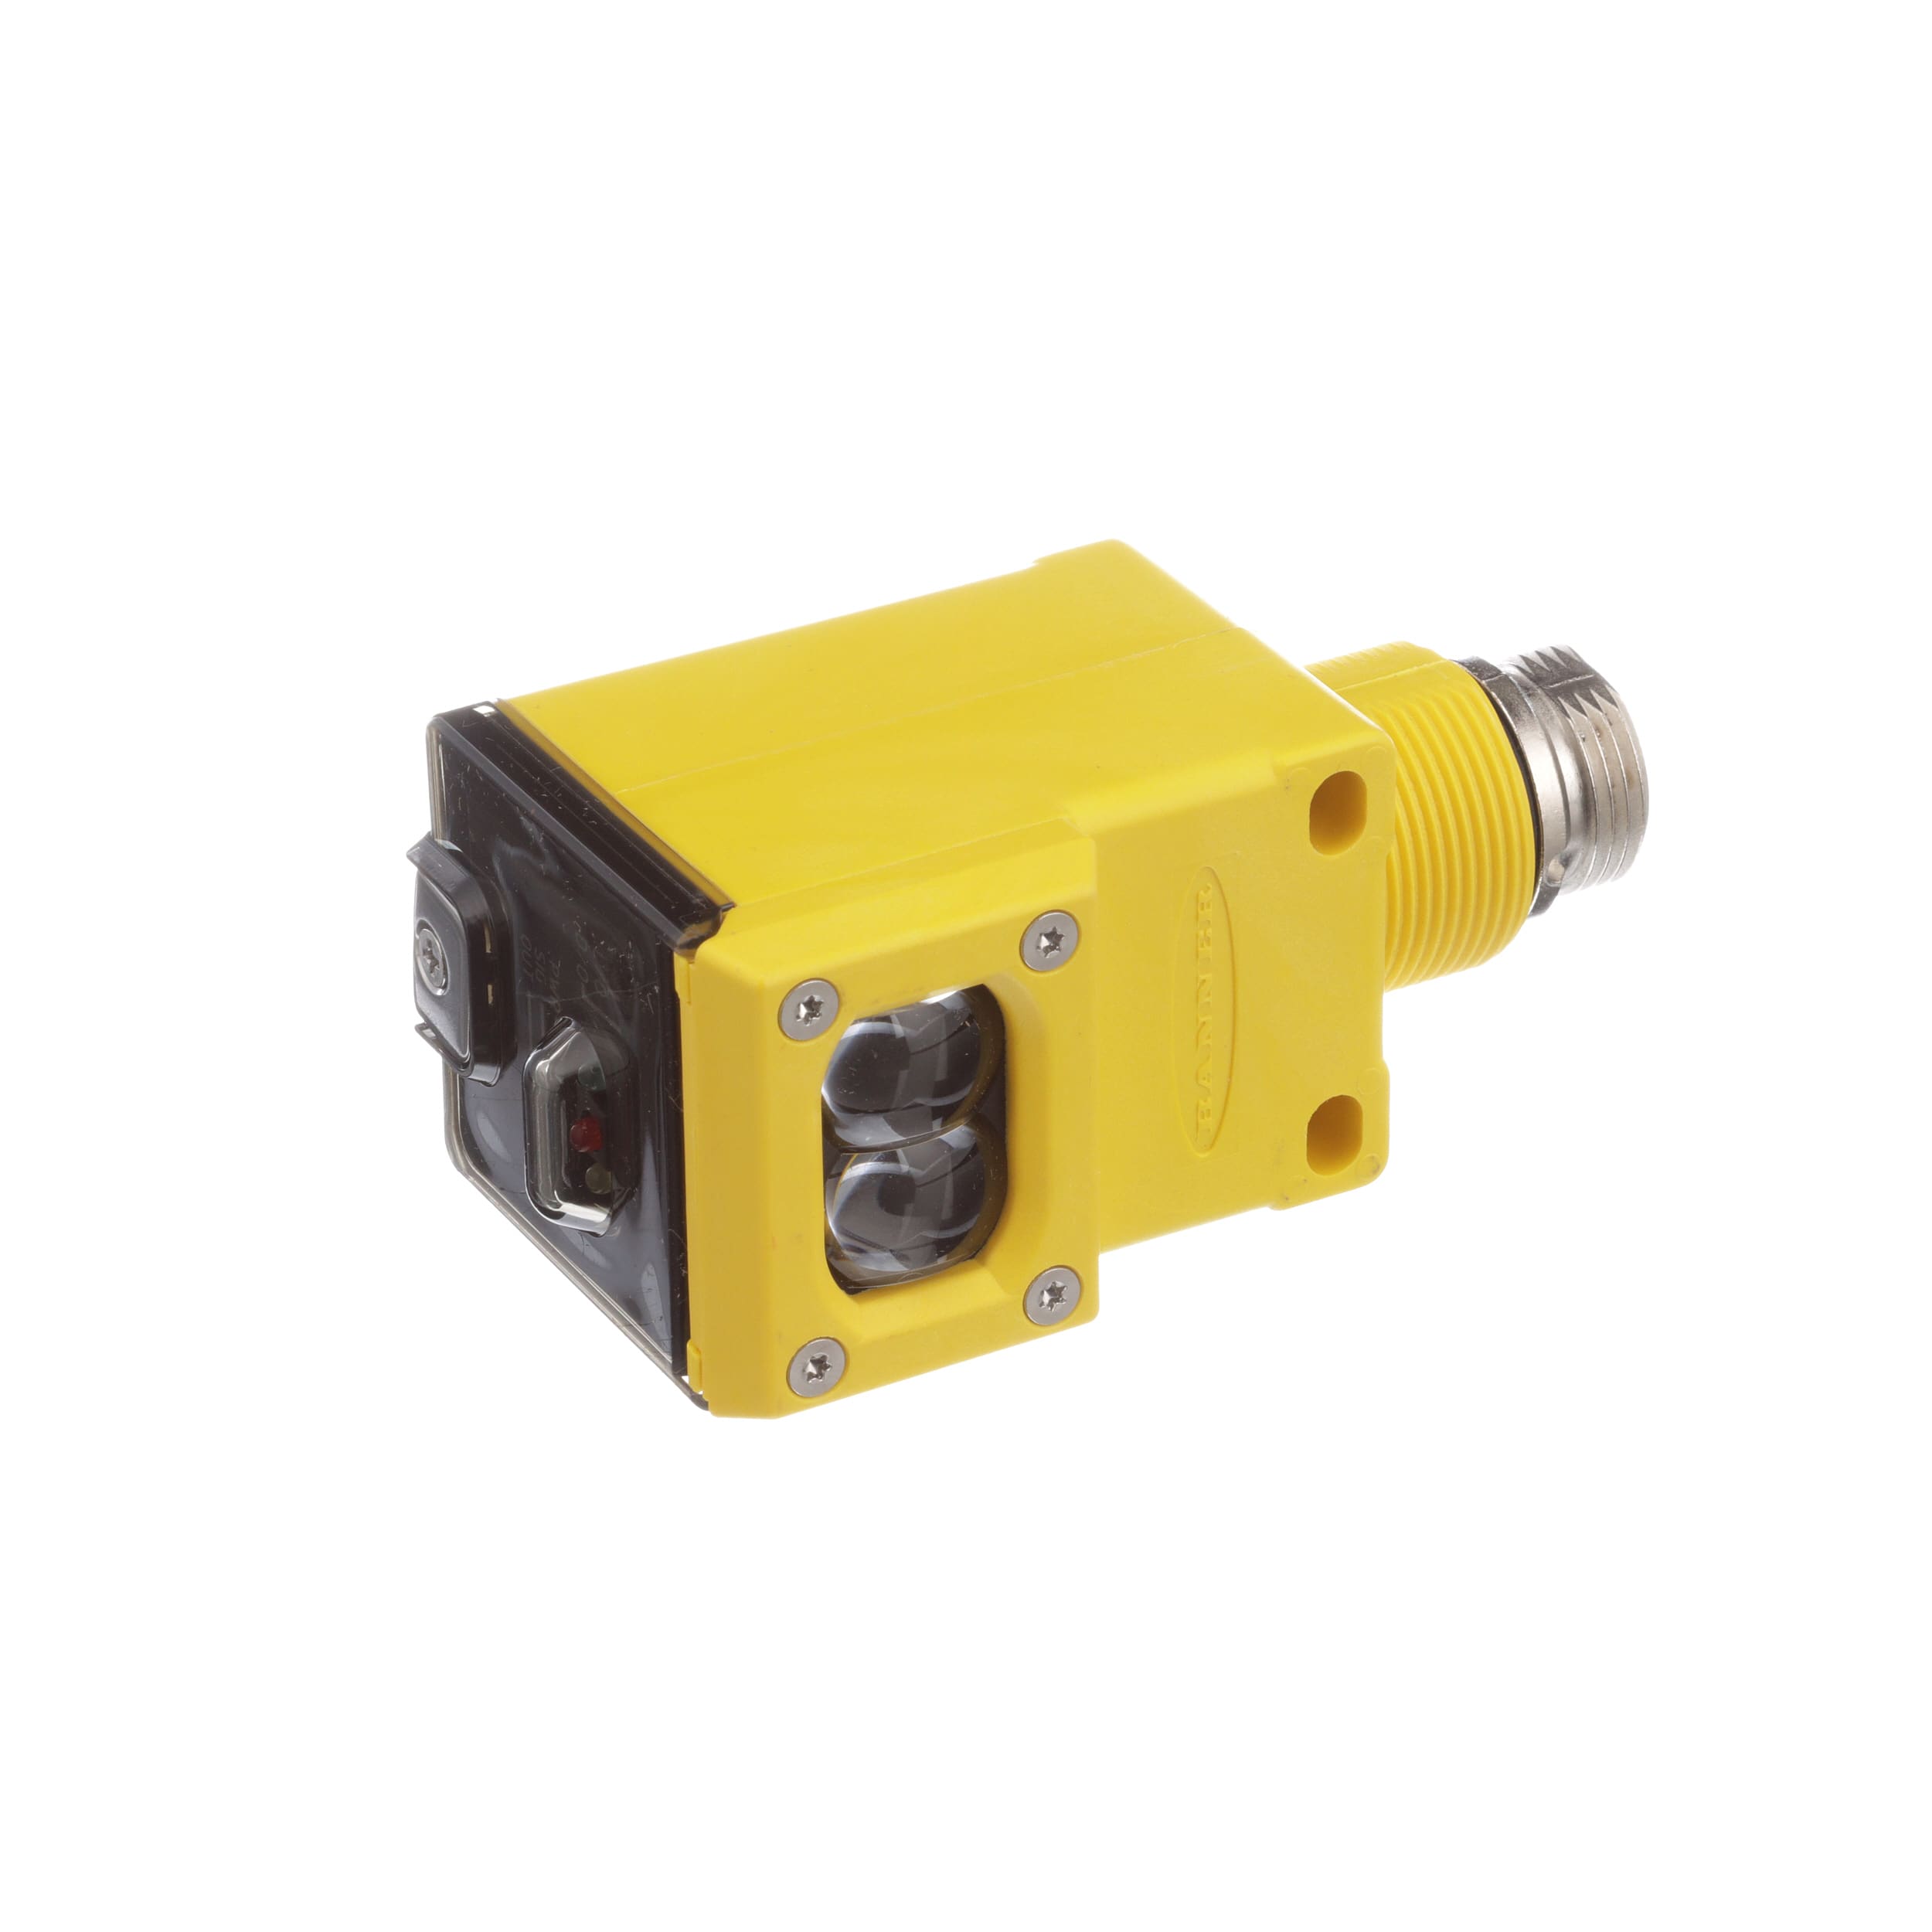 Details about   BANNER Q45BW13RQ PHOTOELECTRIC SENSORS 24-250 VAC 50/60HZ OR 12-250 VDC 300mA 